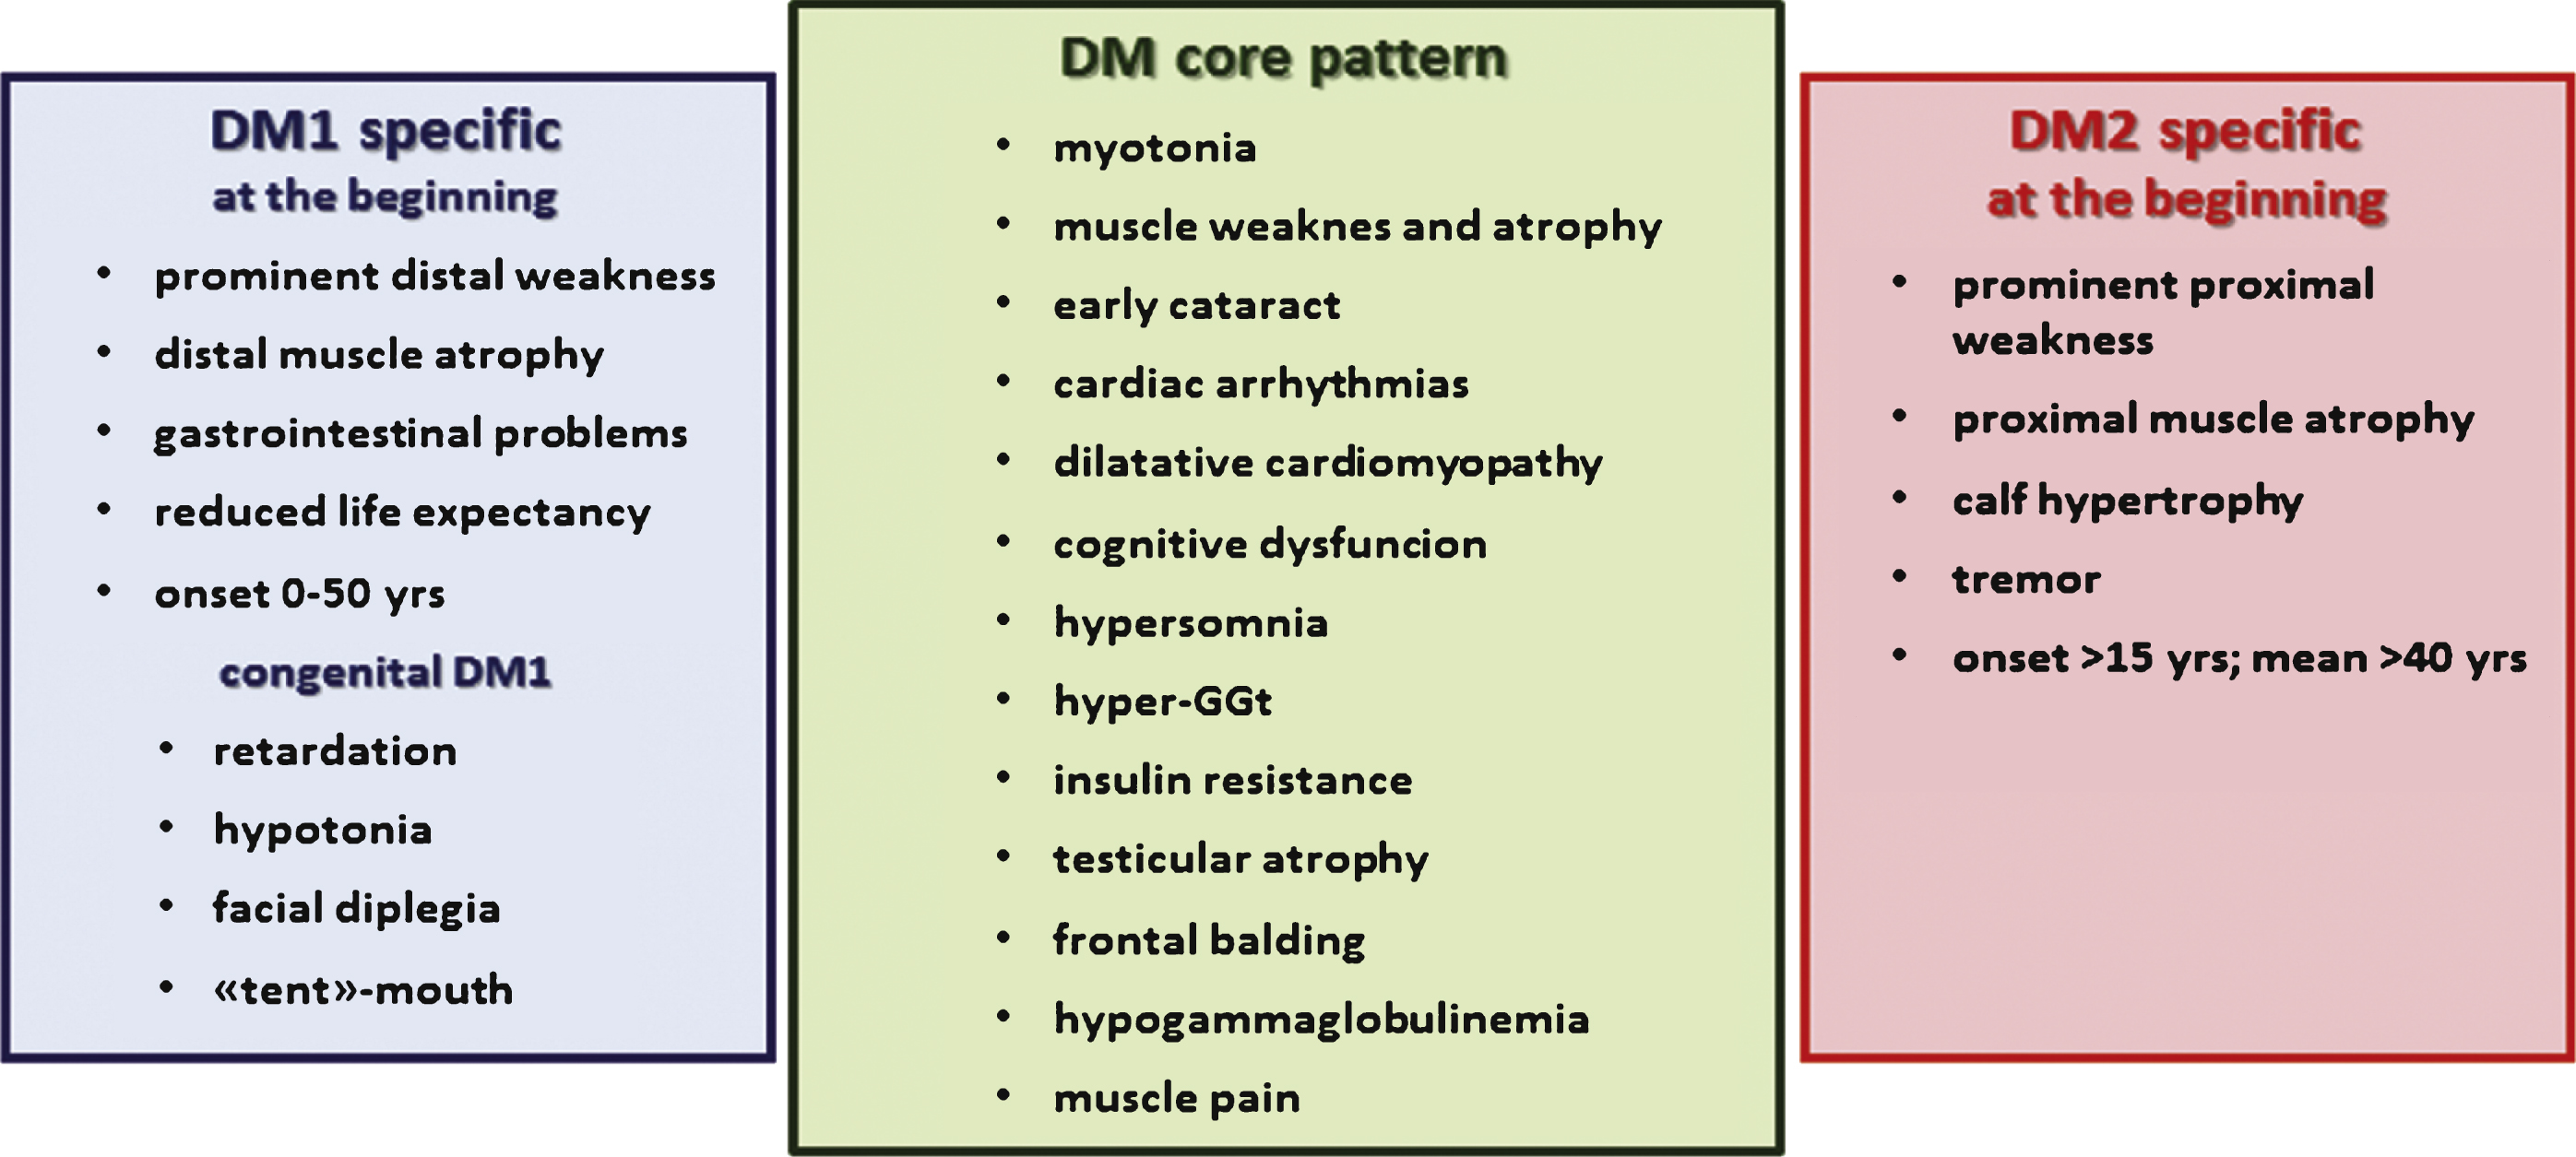 Myotonic dystrophies are multisystemic diseases with a core pattern of clinical presentation which also presents a number of dissimilar features making them clearly separate diseases.